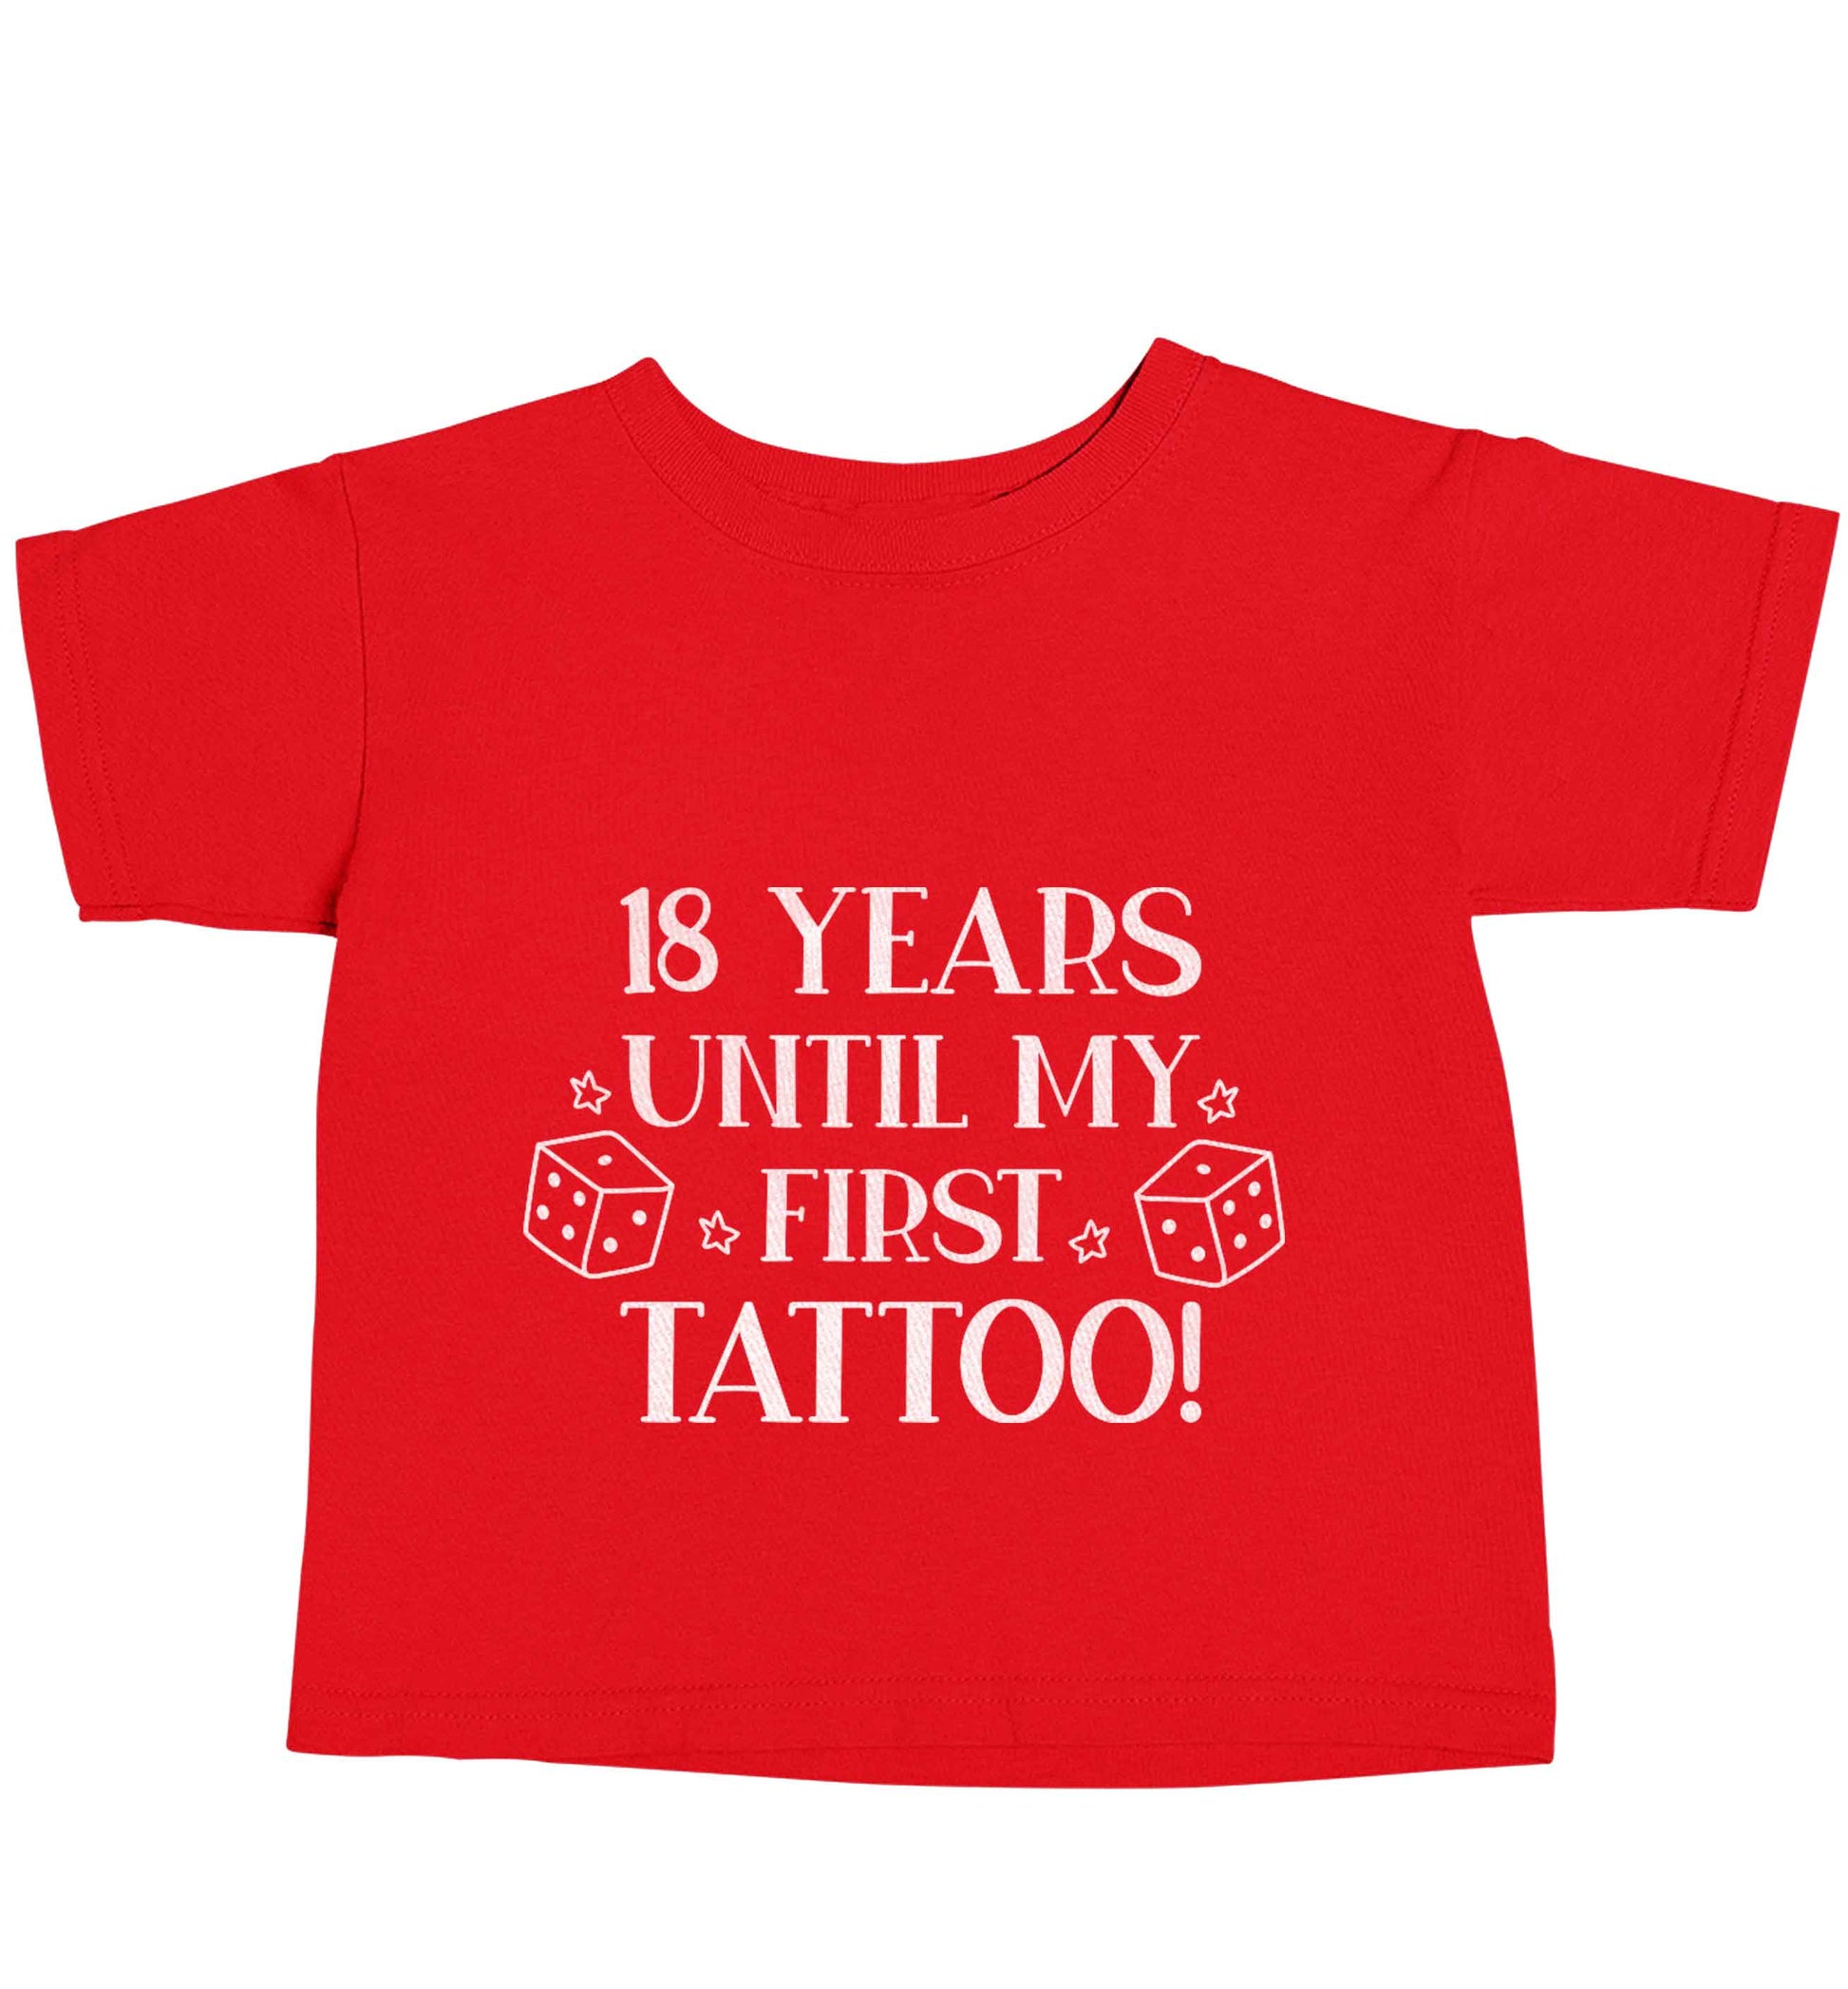 18 Years Until my First Tattoo red baby toddler Tshirt 2 Years